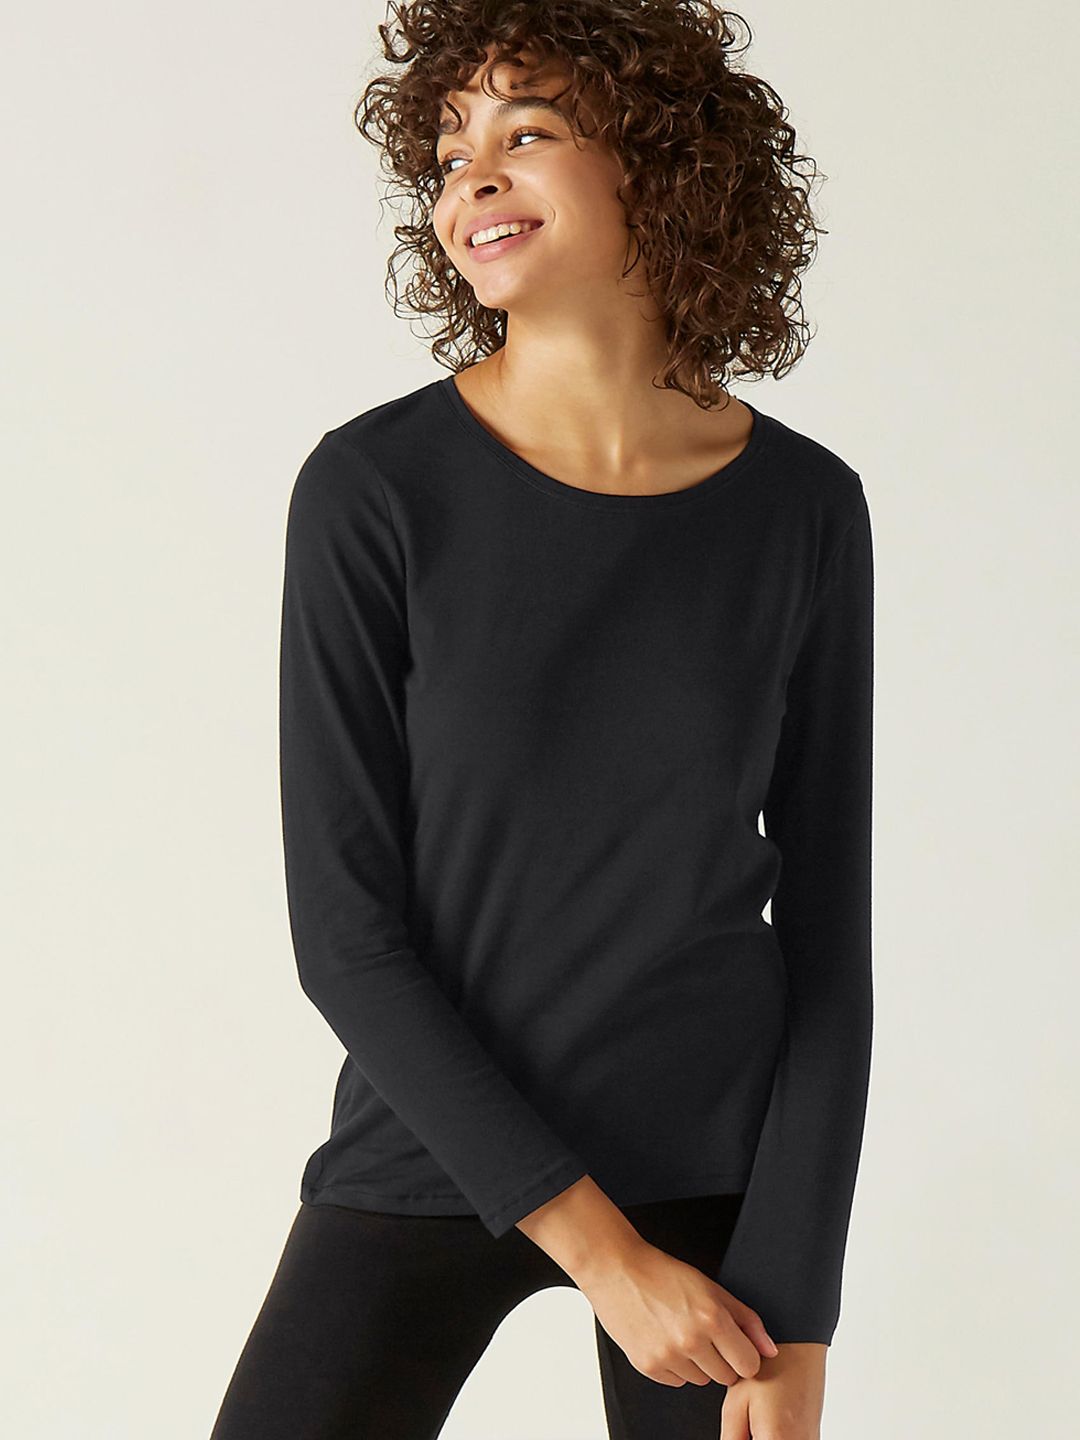 NYAMBA By Decathlon Women Black Solid Round Neck T-shirt Price in India